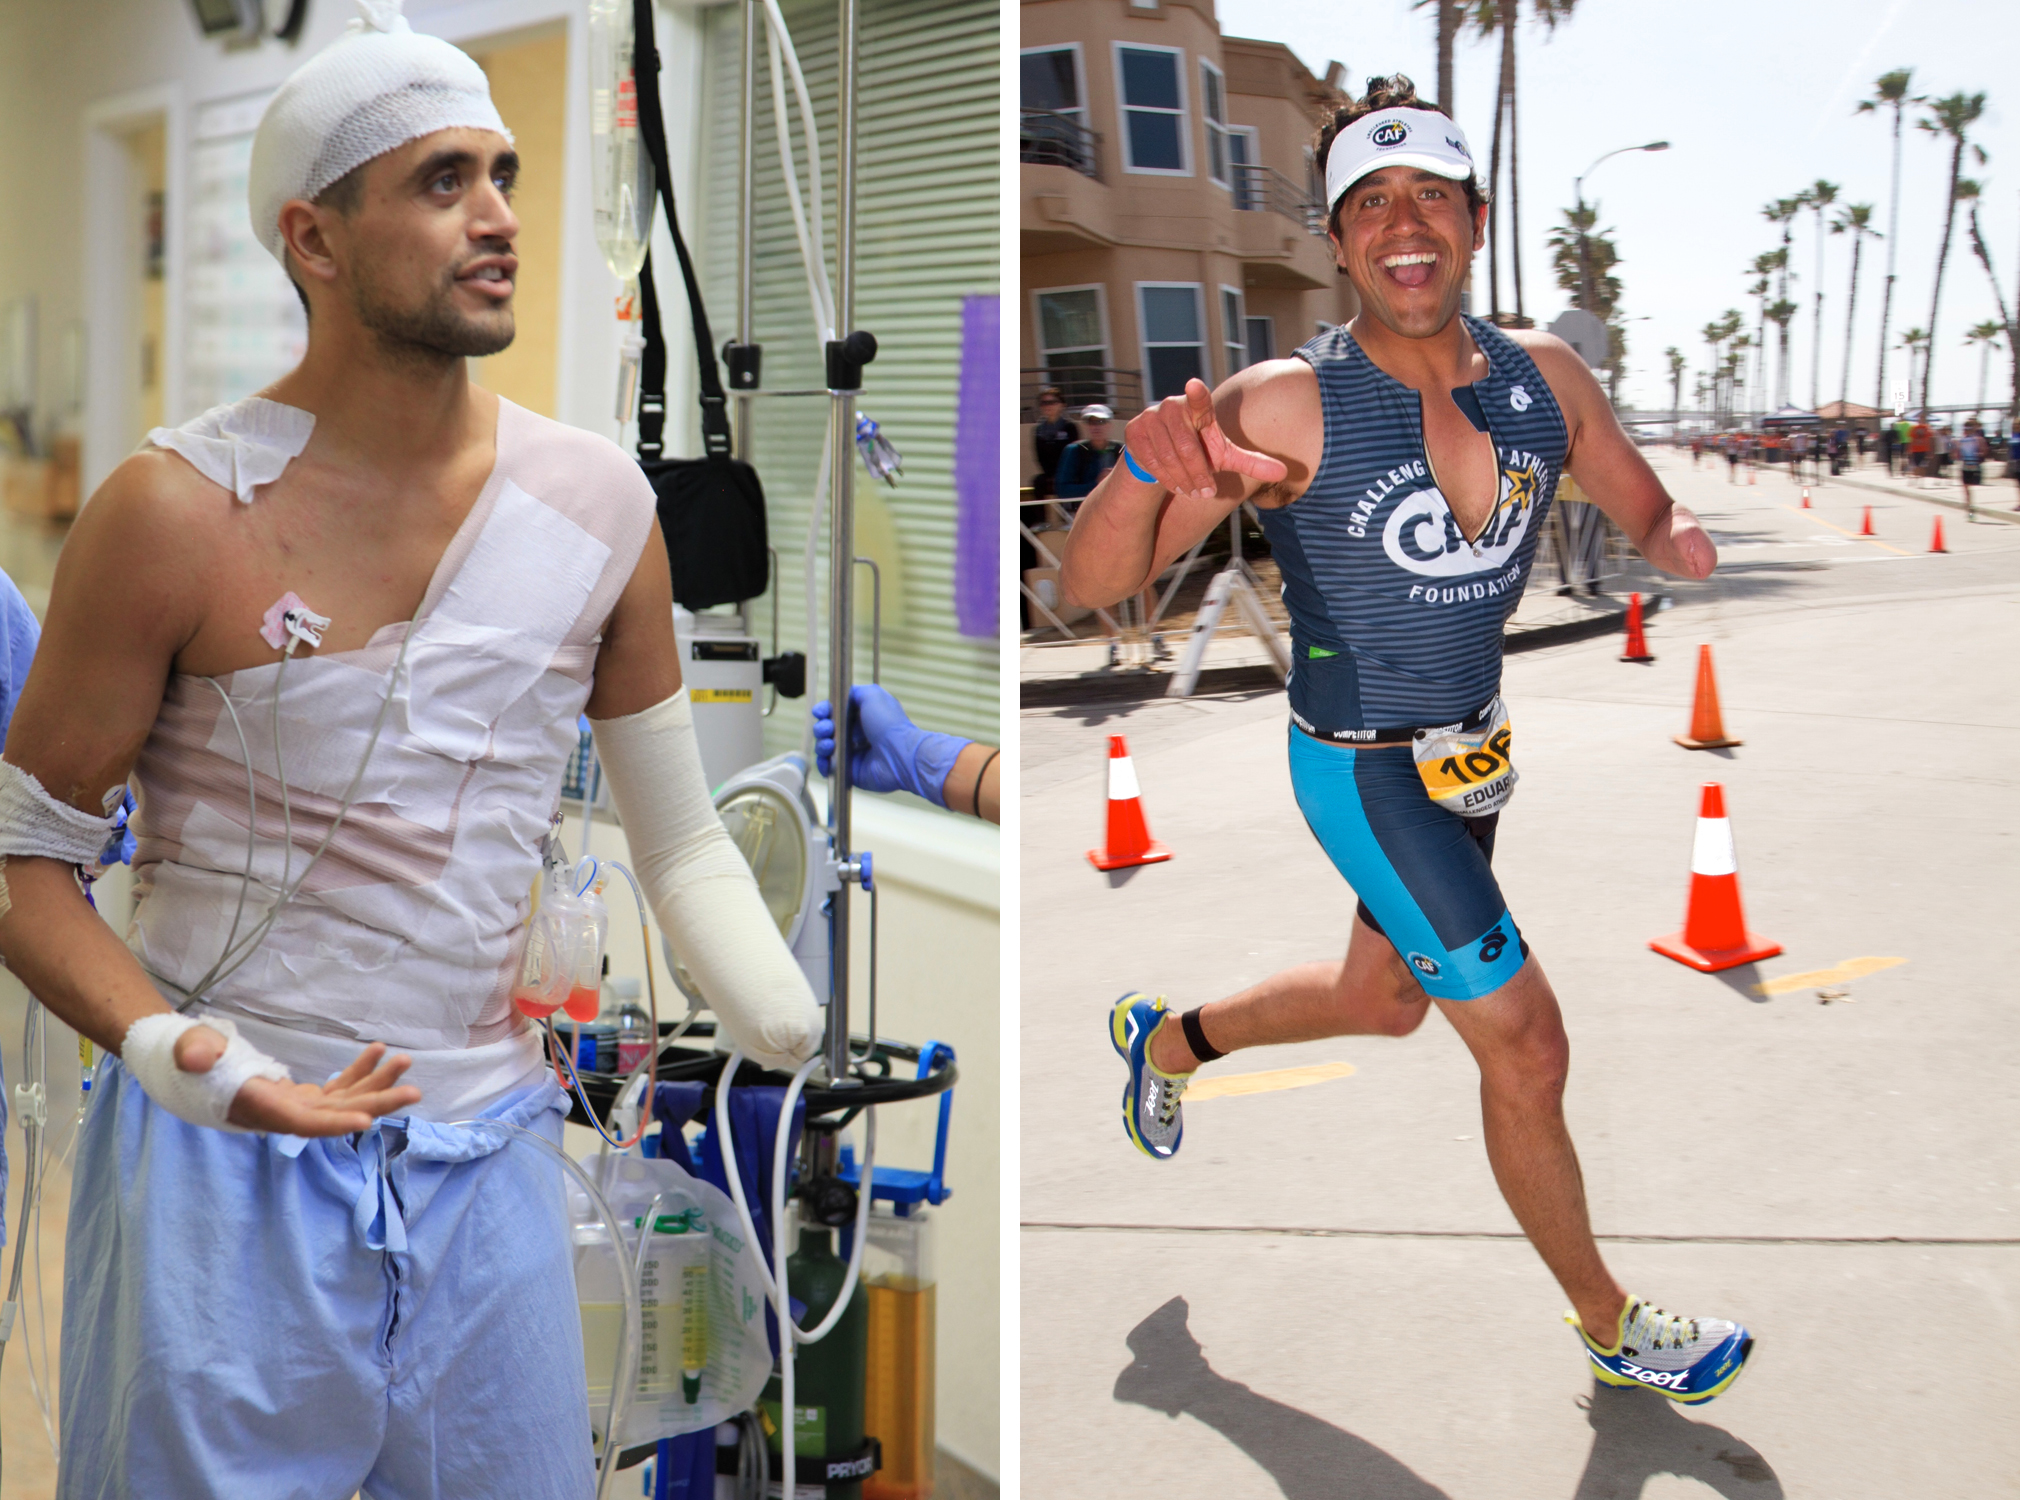 Eduardo Garcia in recovery from his accident and competing in a Challenged Athletes Foundation Ironman in 2015